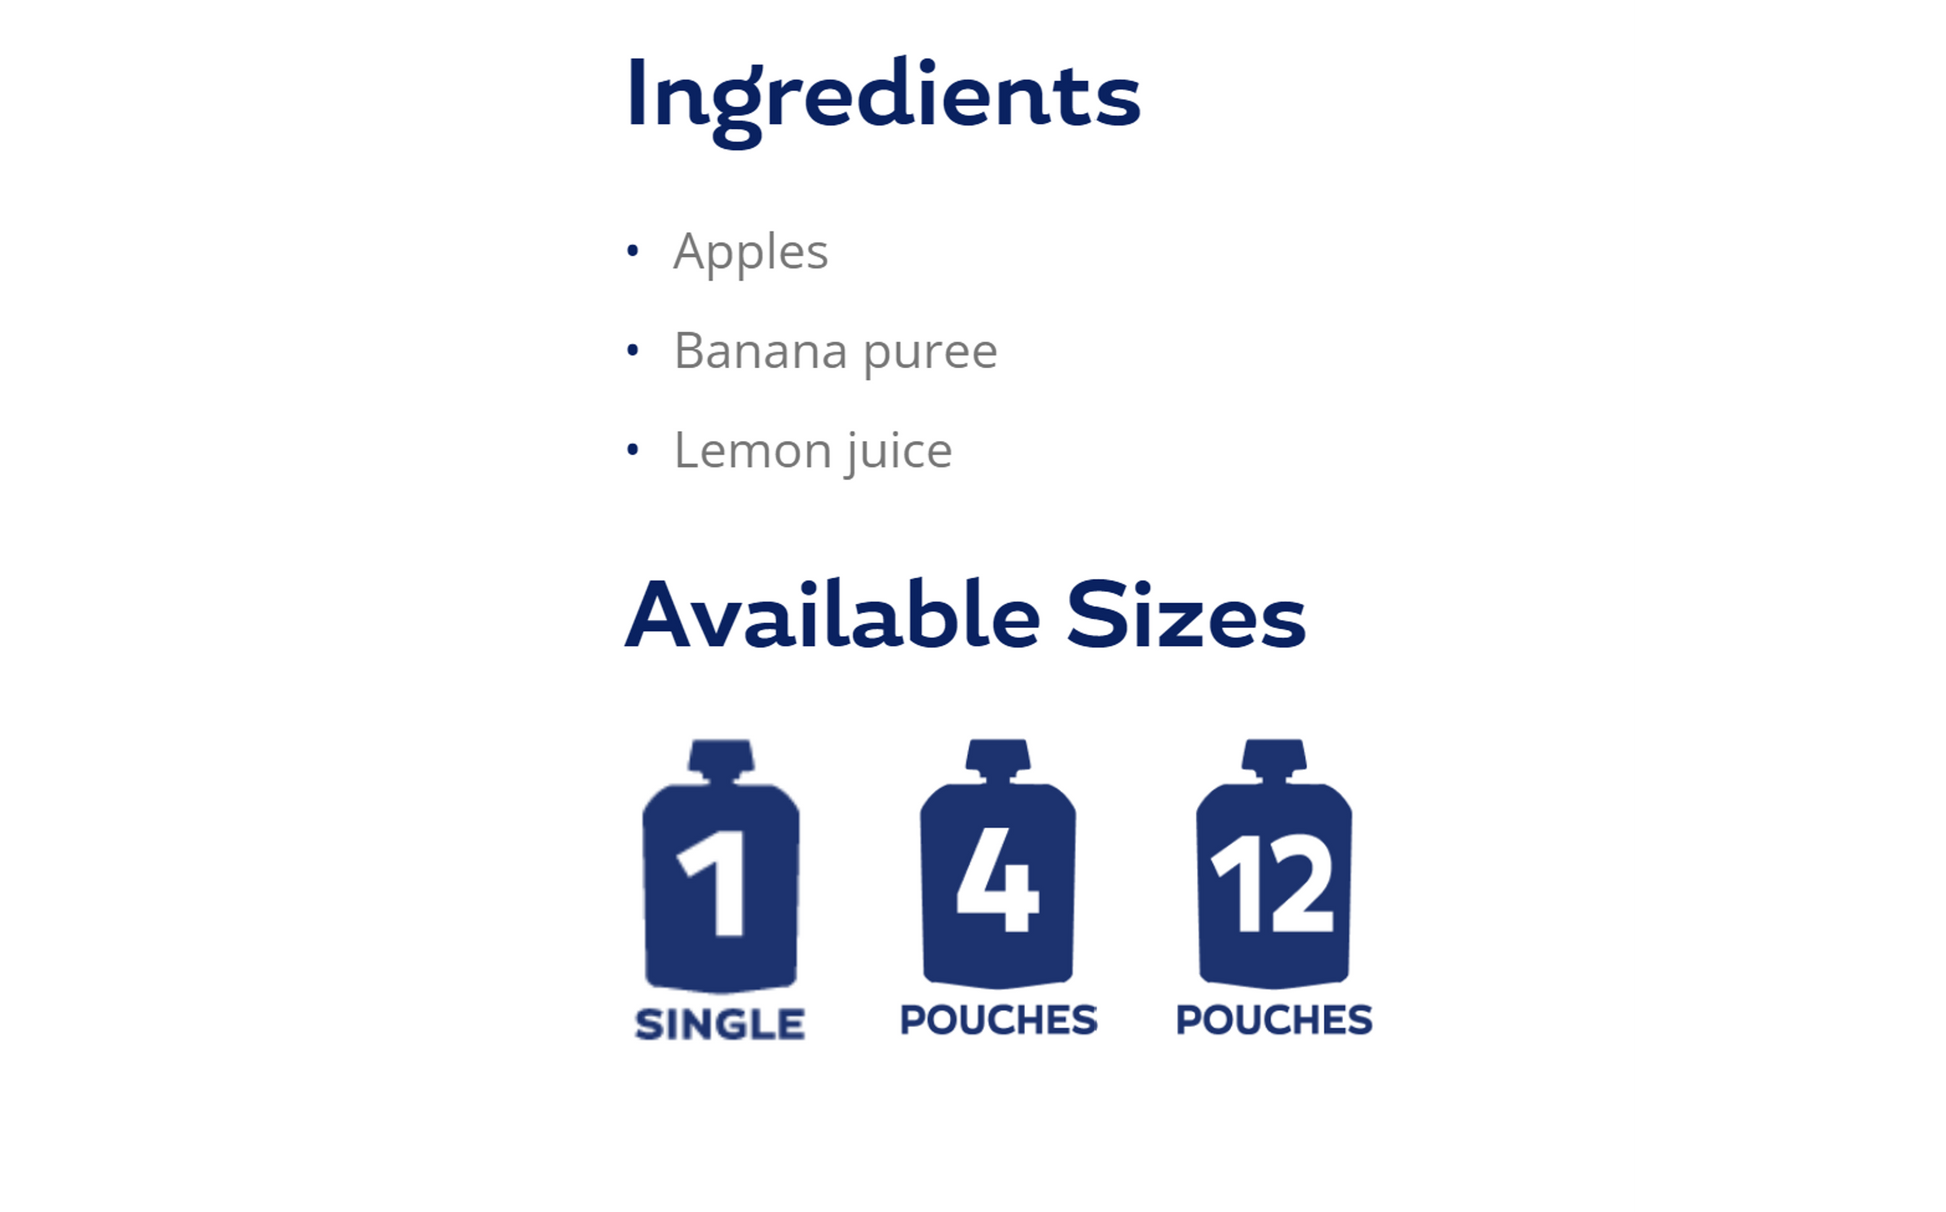 Simple ingredients and available sizes of Buddy Fruits Banana & Apple fruit pouch.